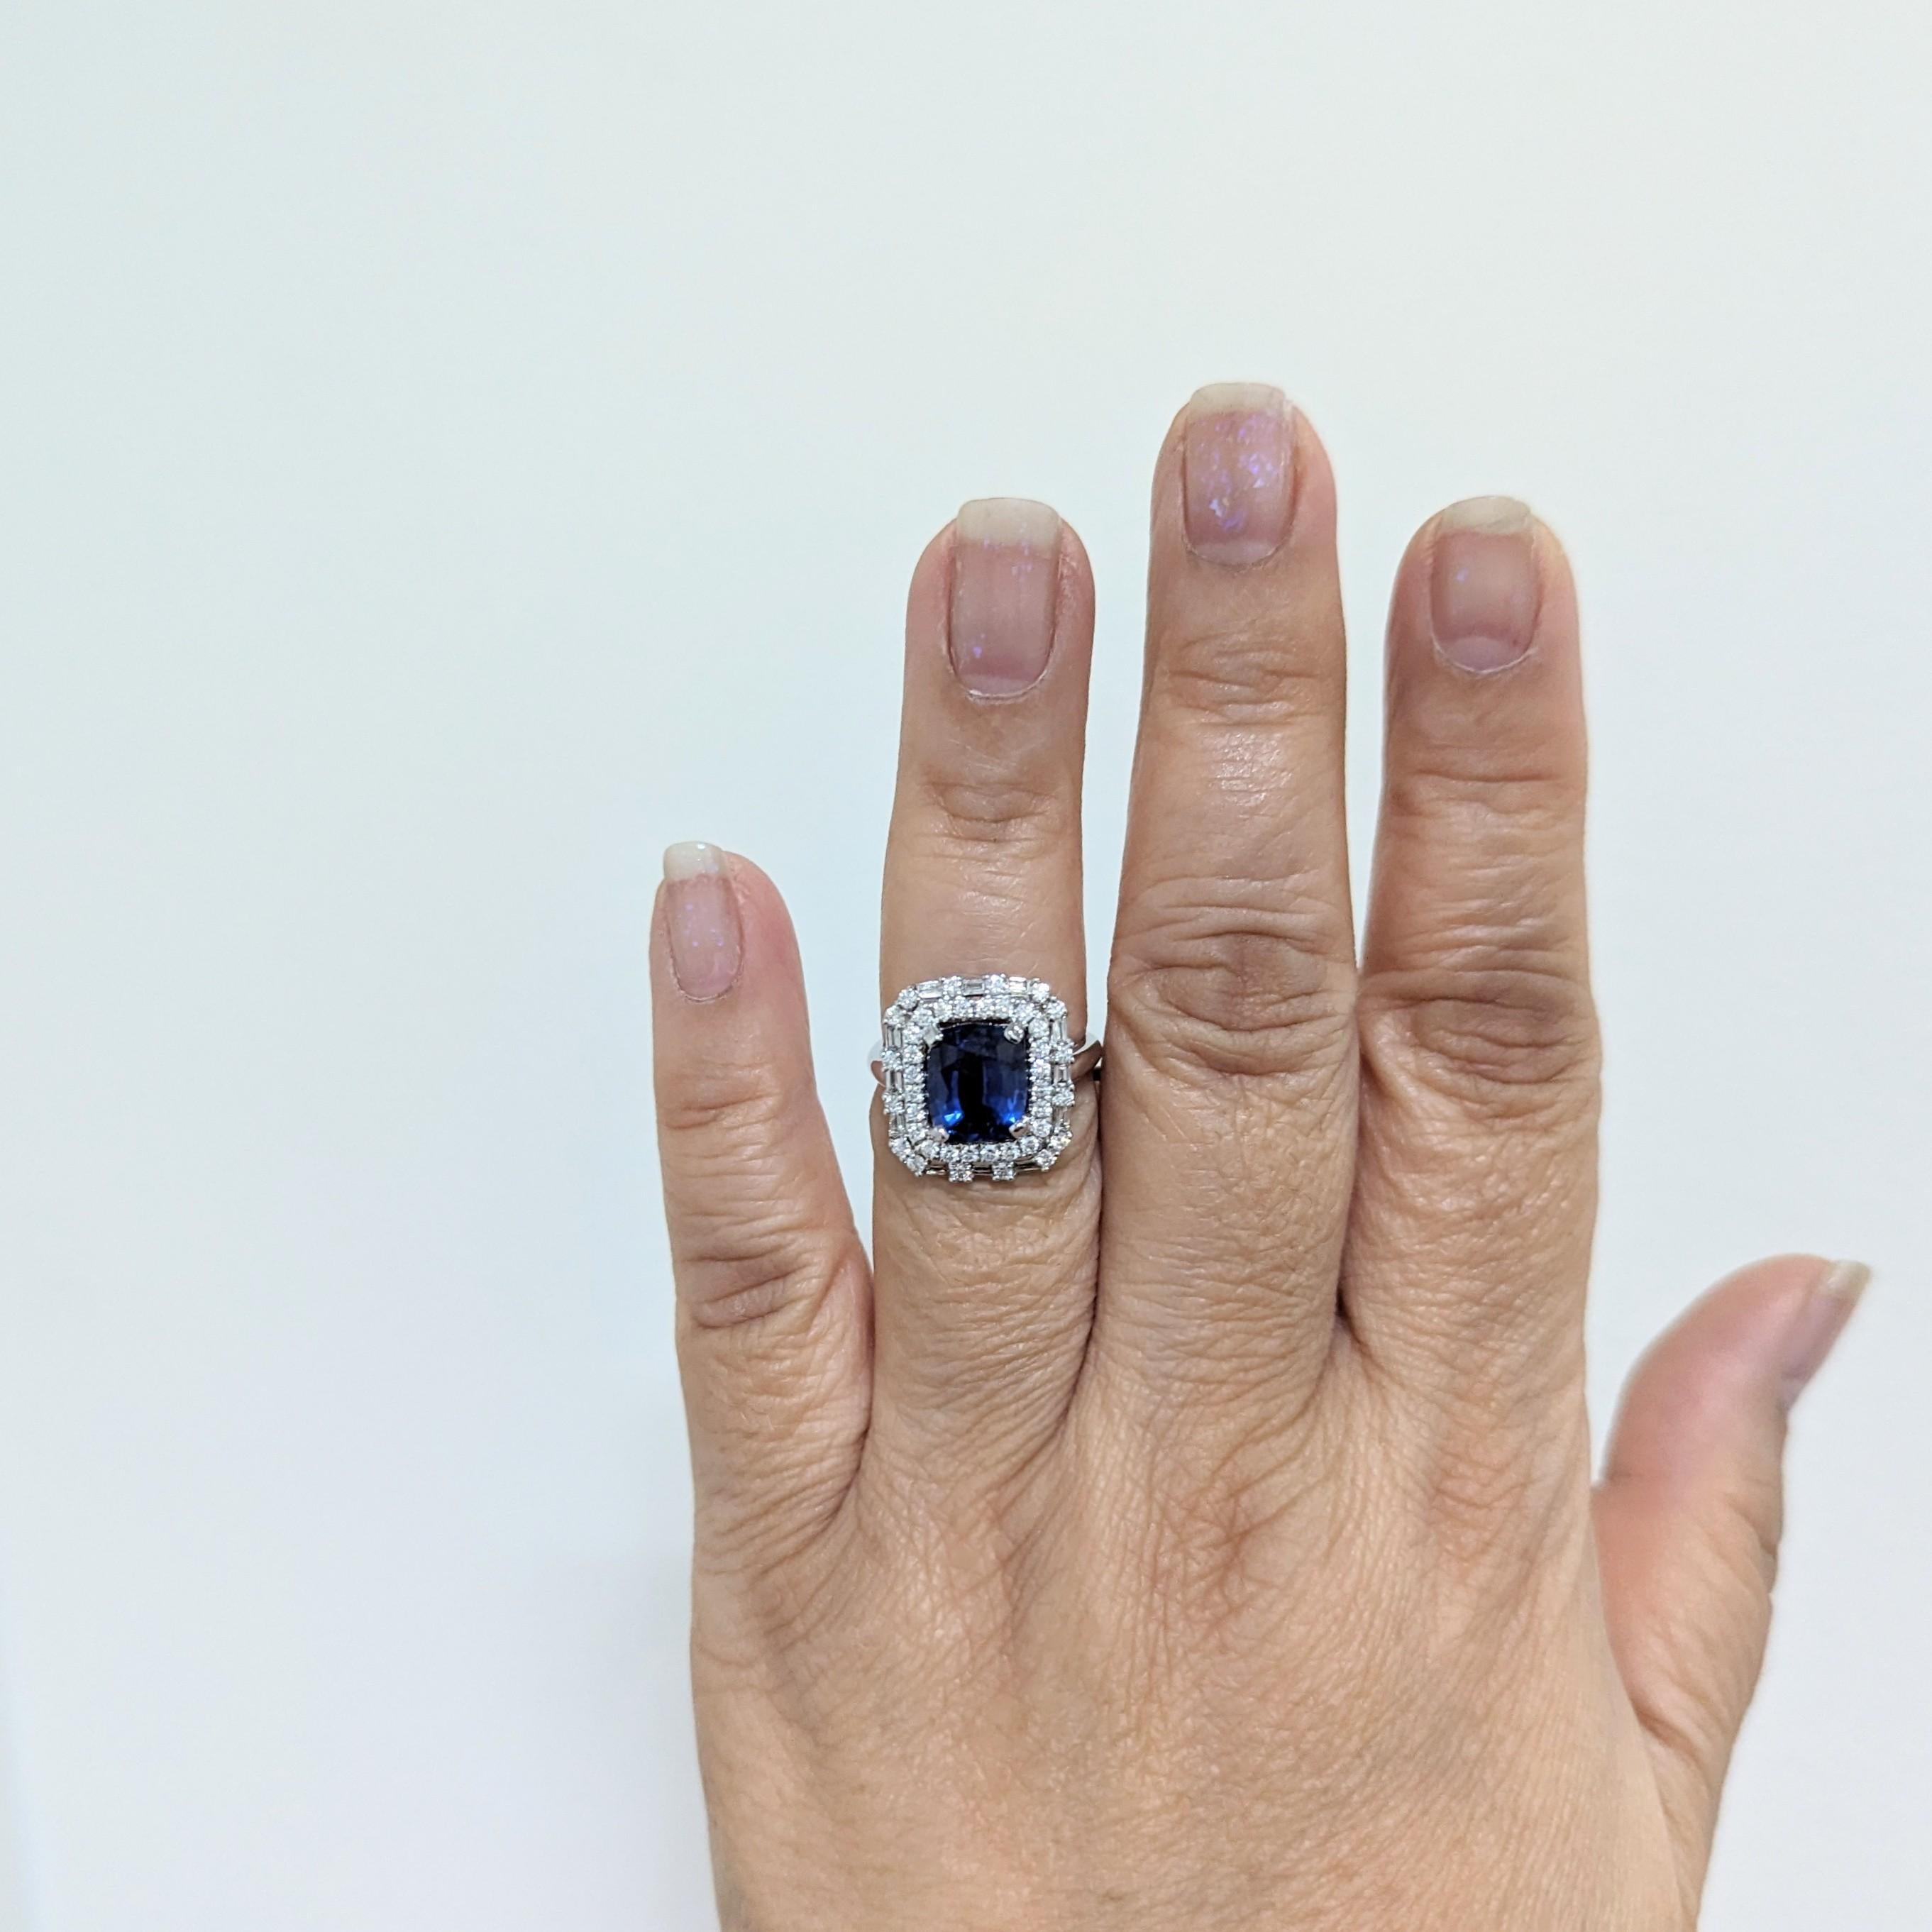 Beautiful 3.11 ct. blue sapphire cushion with good quality white diamond rounds and baguettes.  Handmade in 14k white gold.  Ring size 6.5.  GIA certificate included.